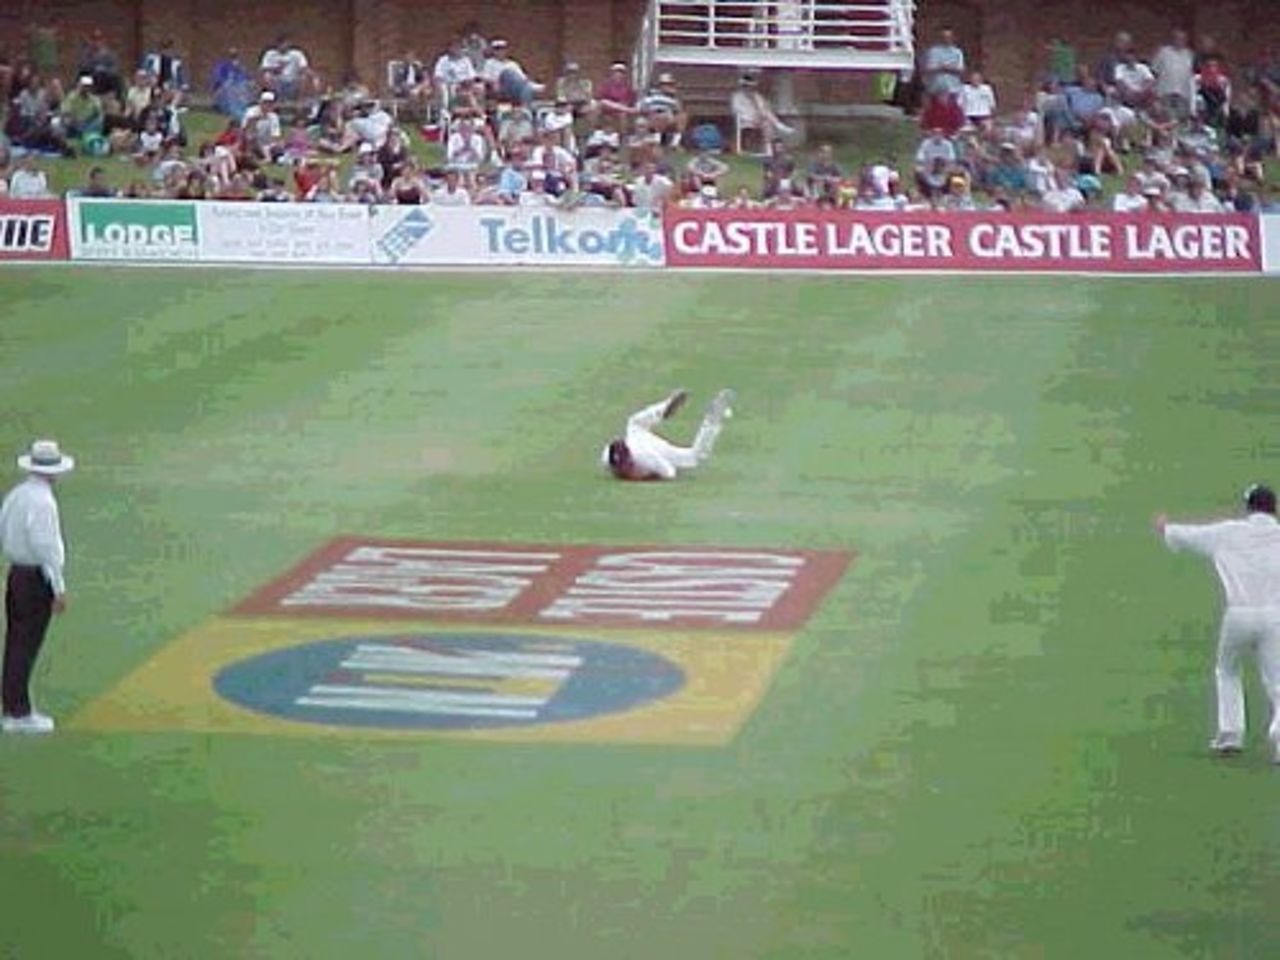 Caddick takes the catch to dismiss Kallis, the second wicket for England on the first morning of the Second Test against South Africa in Port Elizabeth. (9 December 1999)